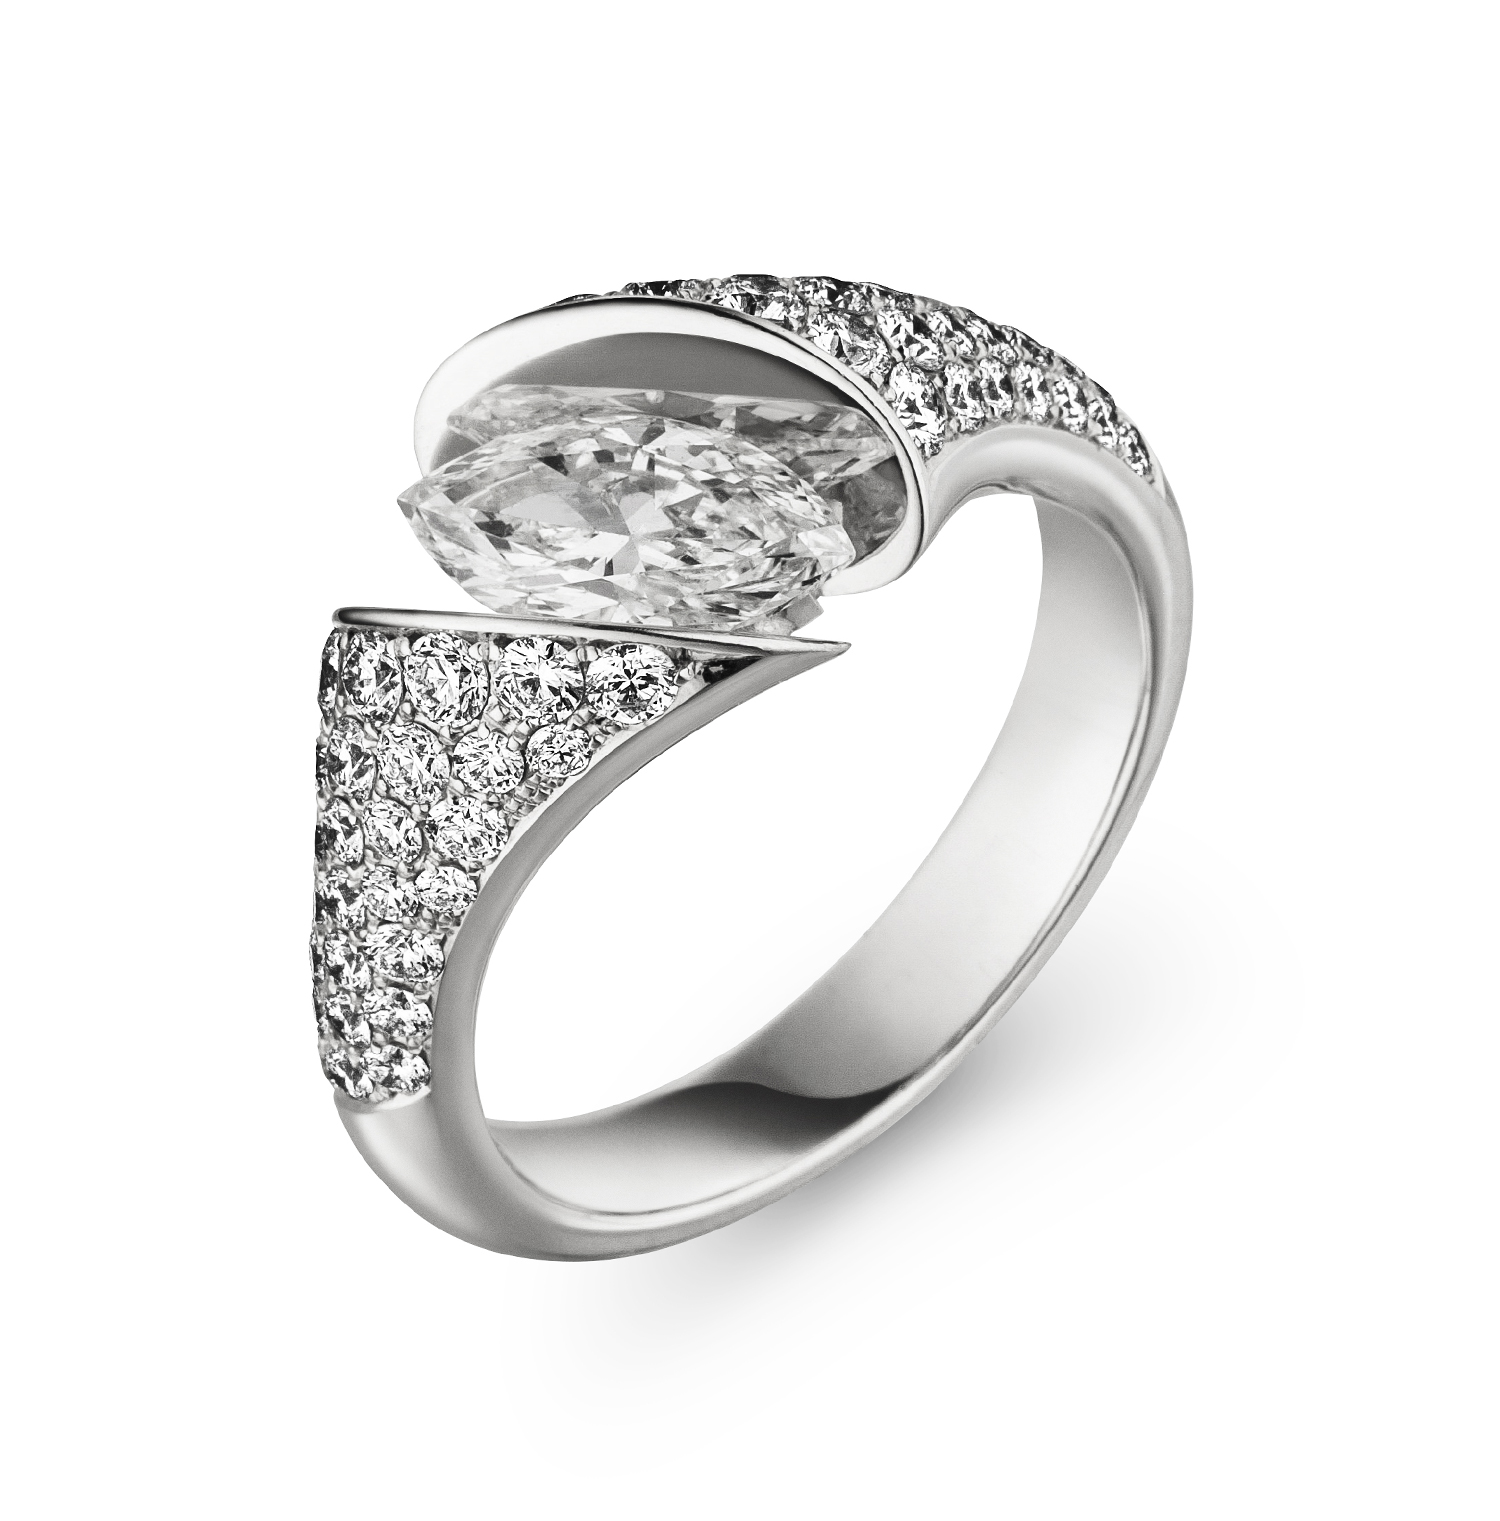 Ring with marquise-shaped central diamond and a pavé of small diamonds.